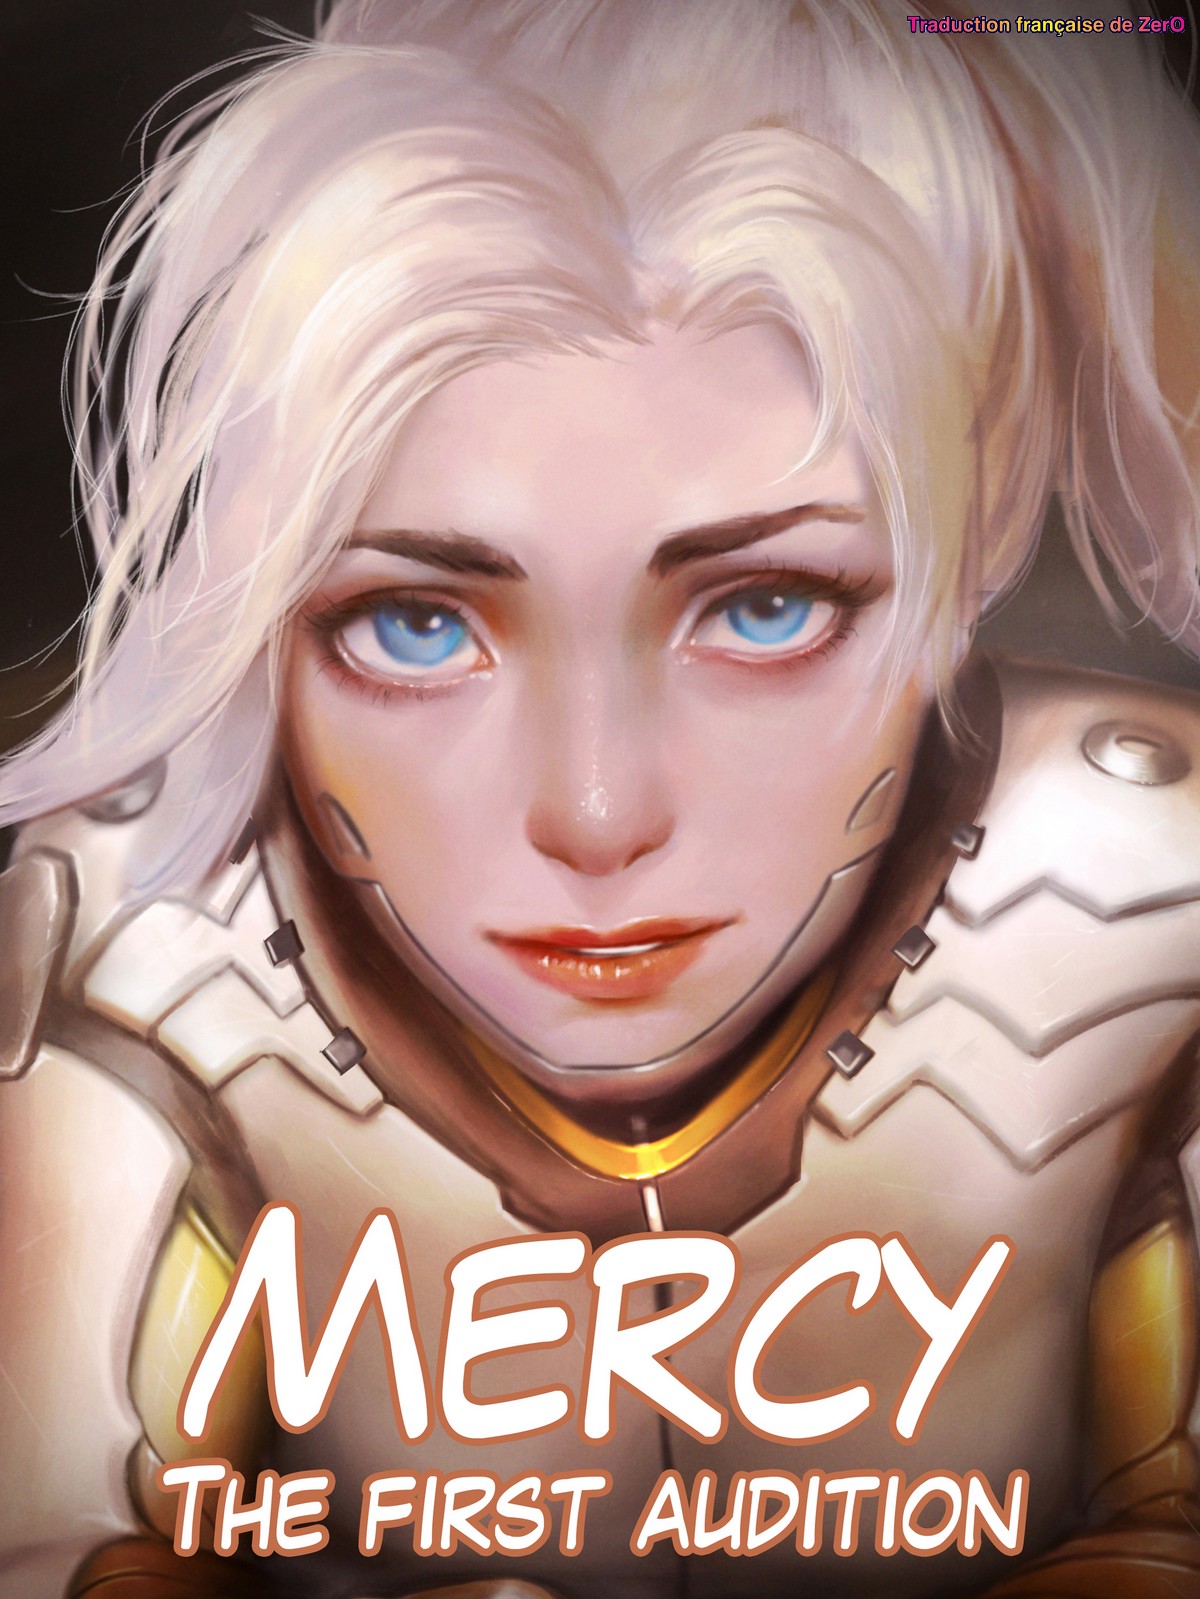 [Firolian] Mercy - The first audition [French] Hentai Comic